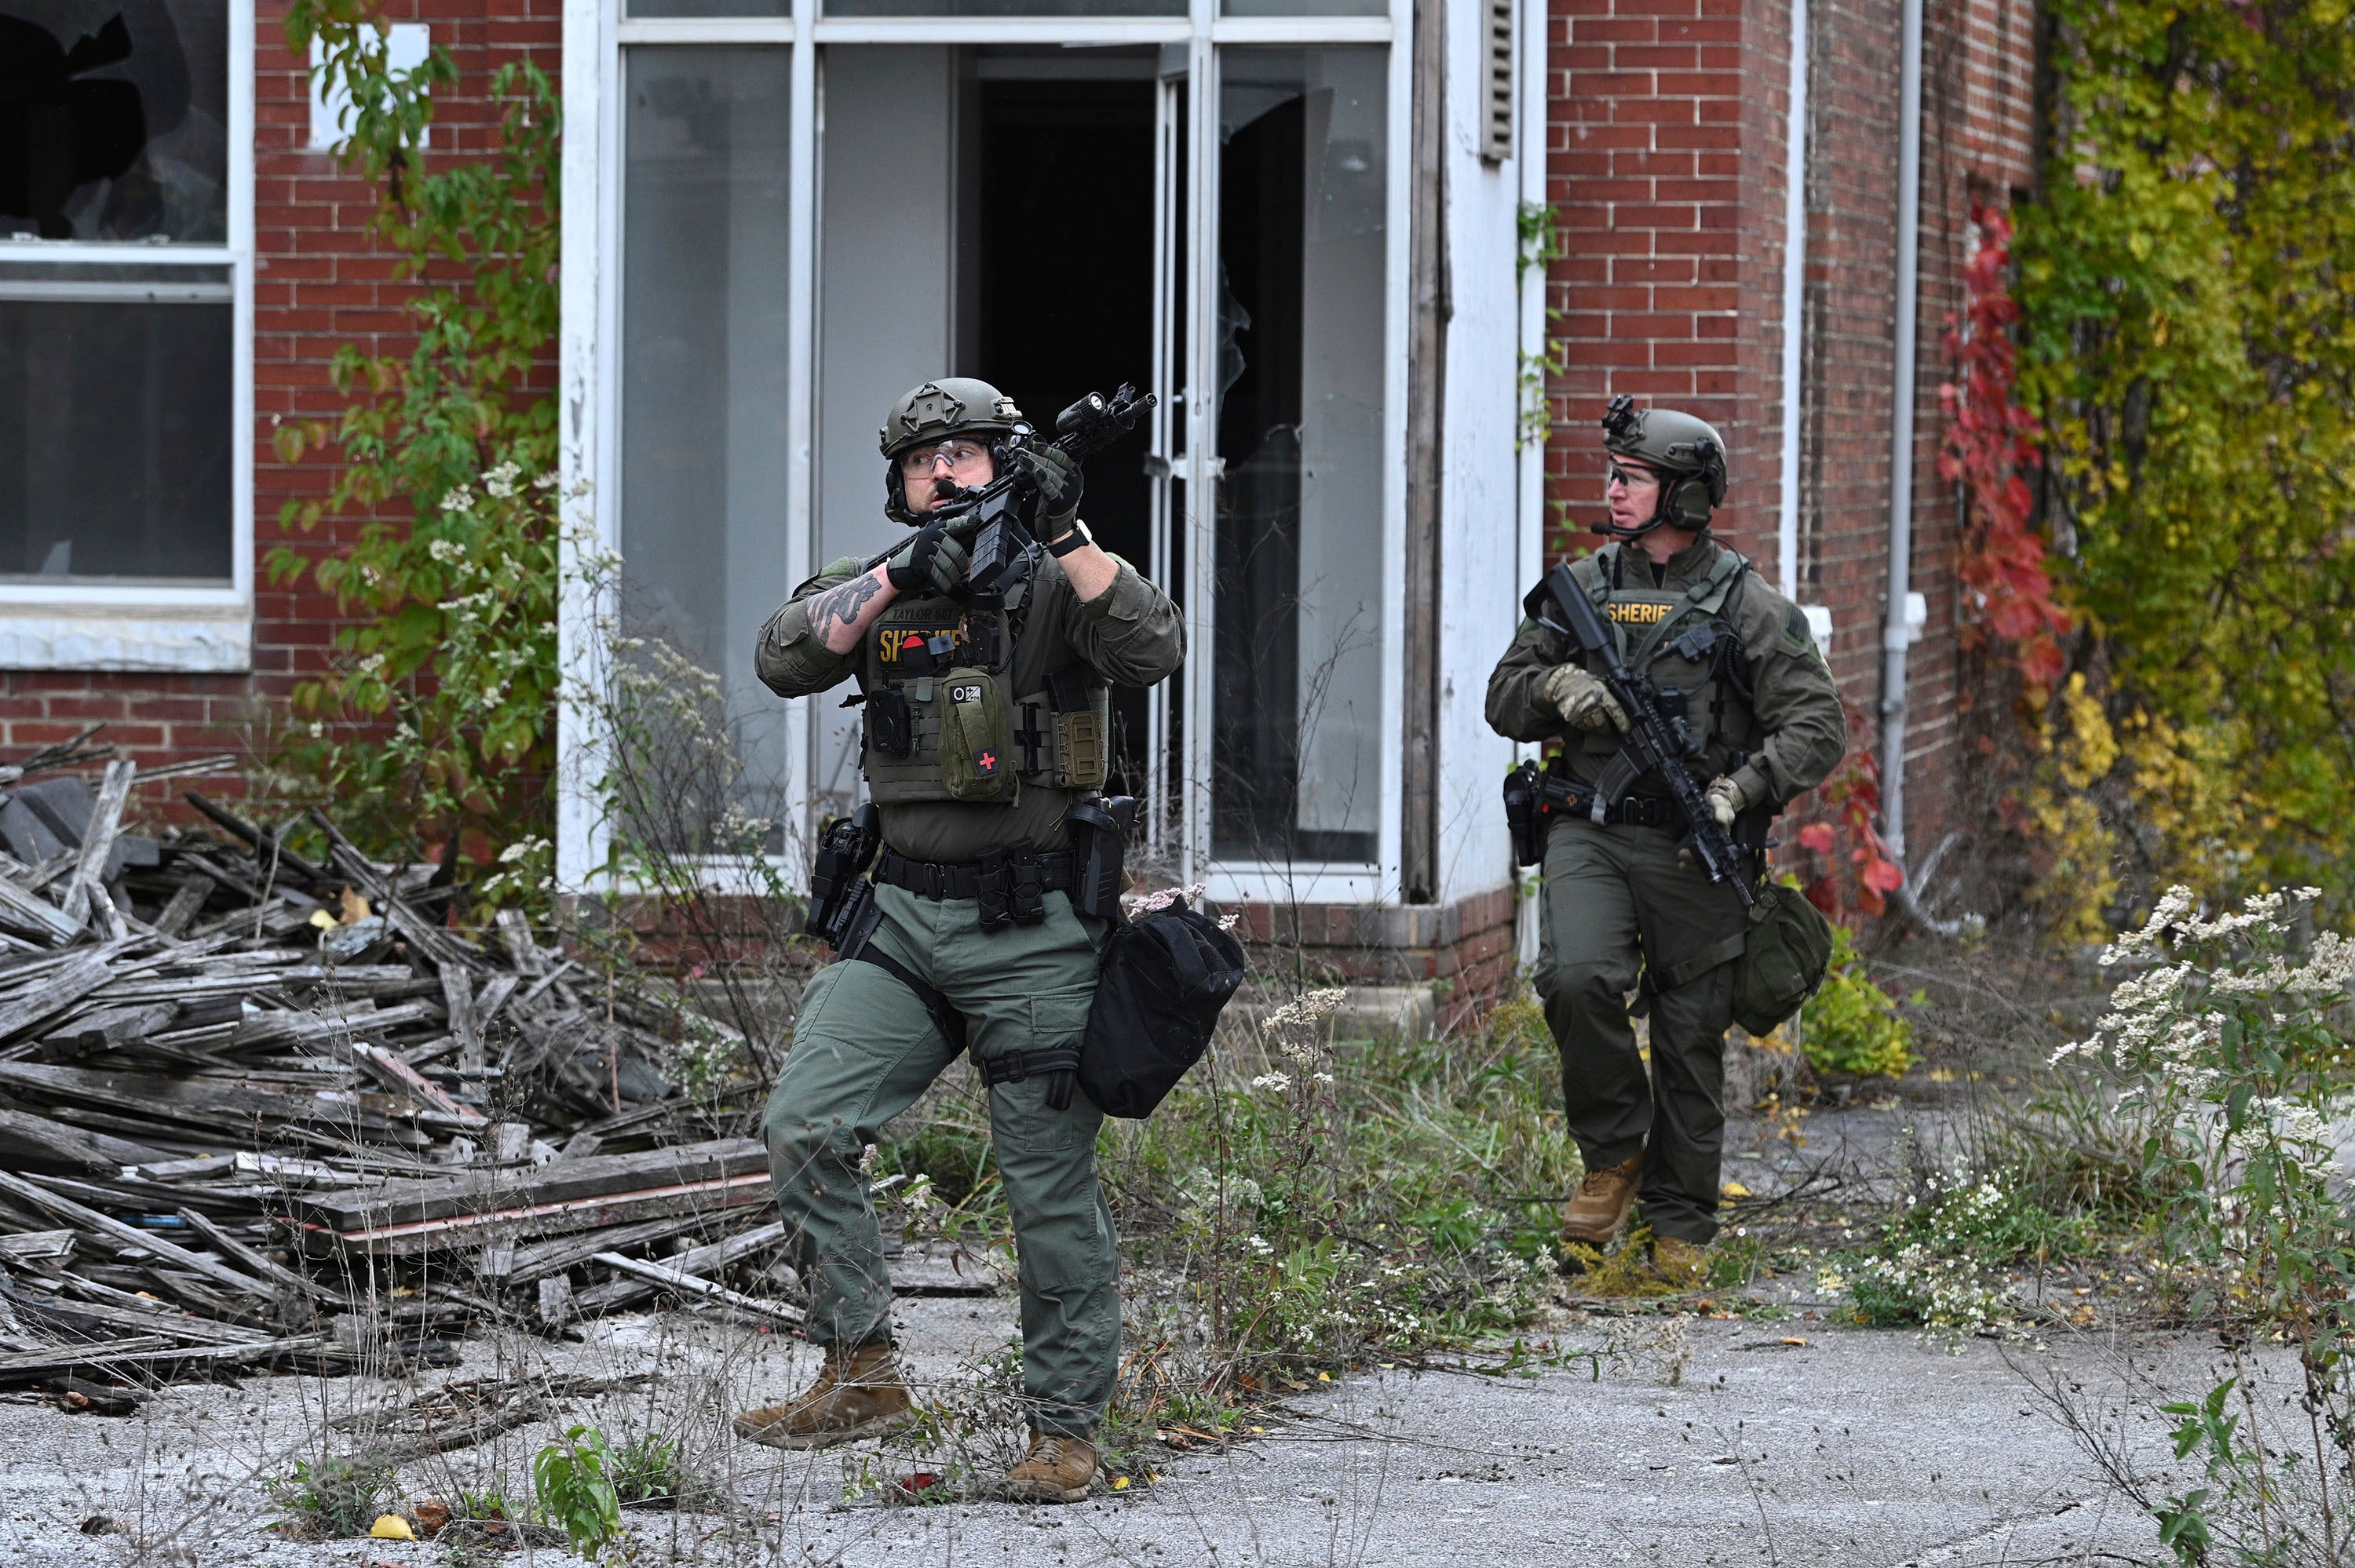 Officers with the Frederick County Sheriff’s Dept. SWAT Team search for suspect Pedro Argote